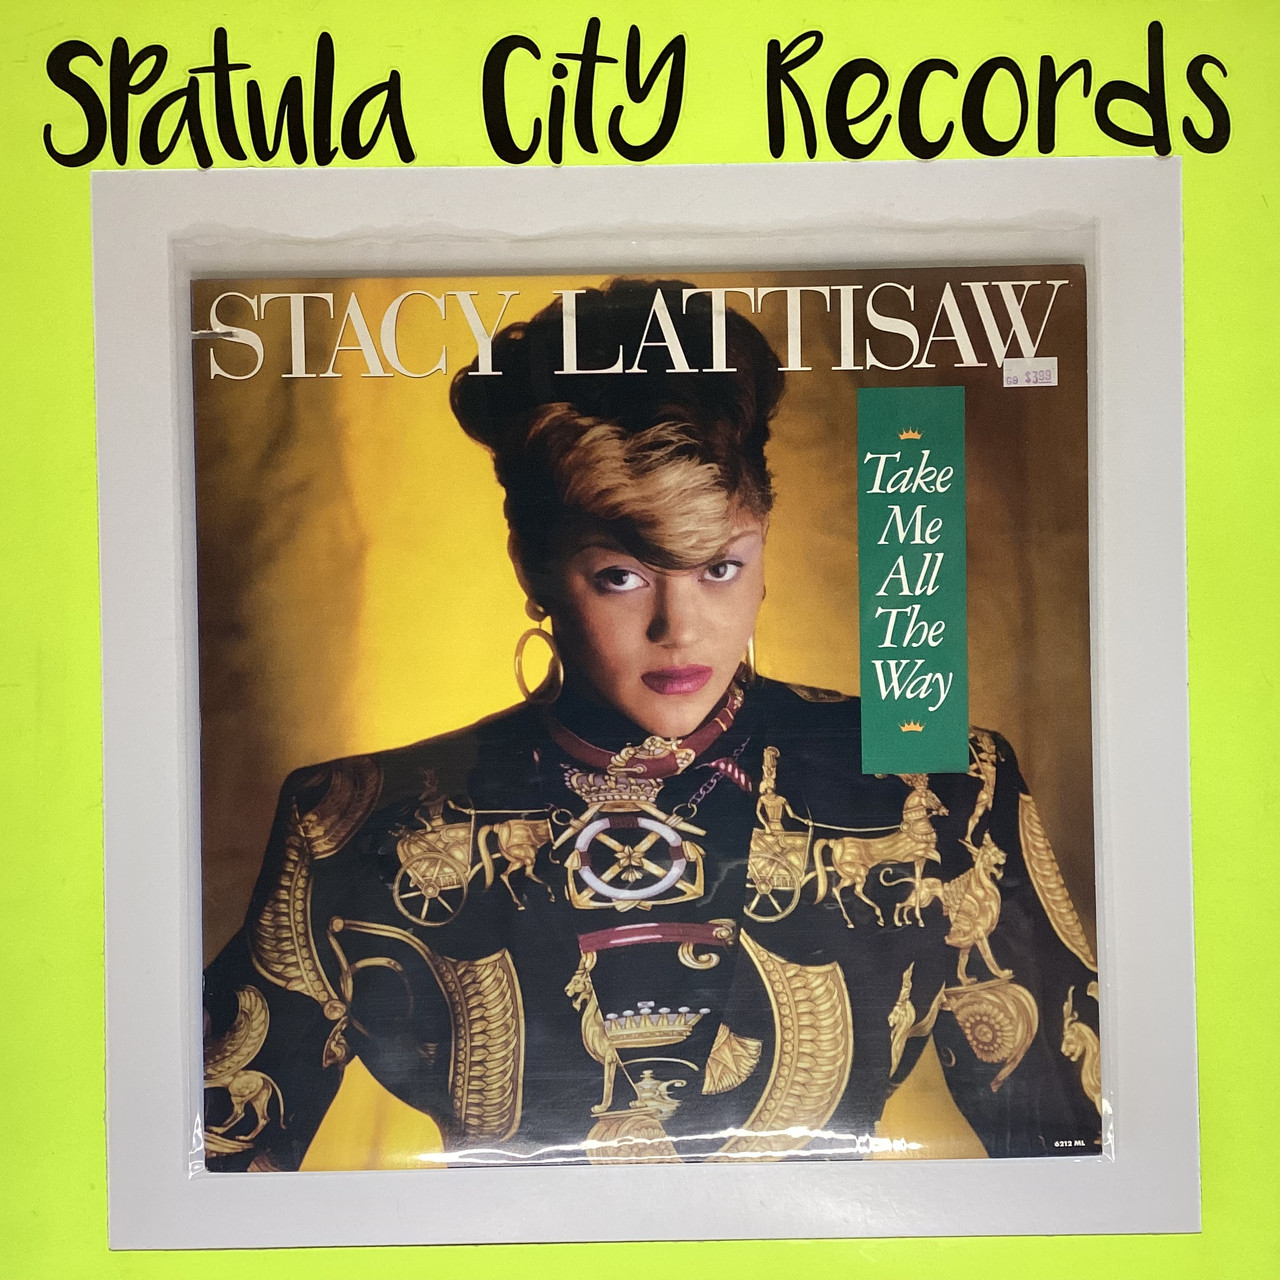 Stacy Lattisaw - Take Me All The Way - vinyl record LP